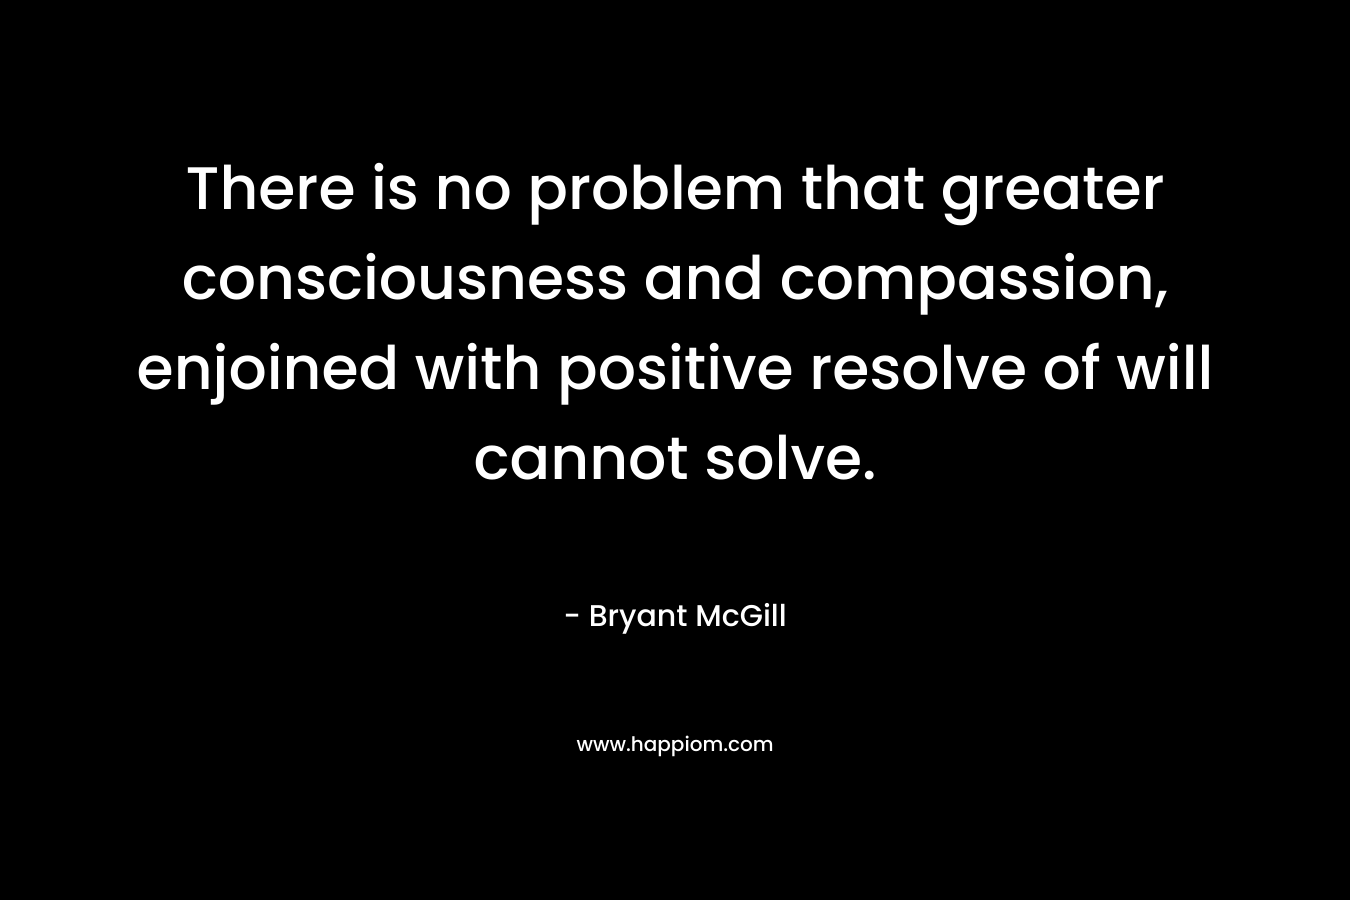 There is no problem that greater consciousness and compassion, enjoined with positive resolve of will cannot solve. – Bryant McGill